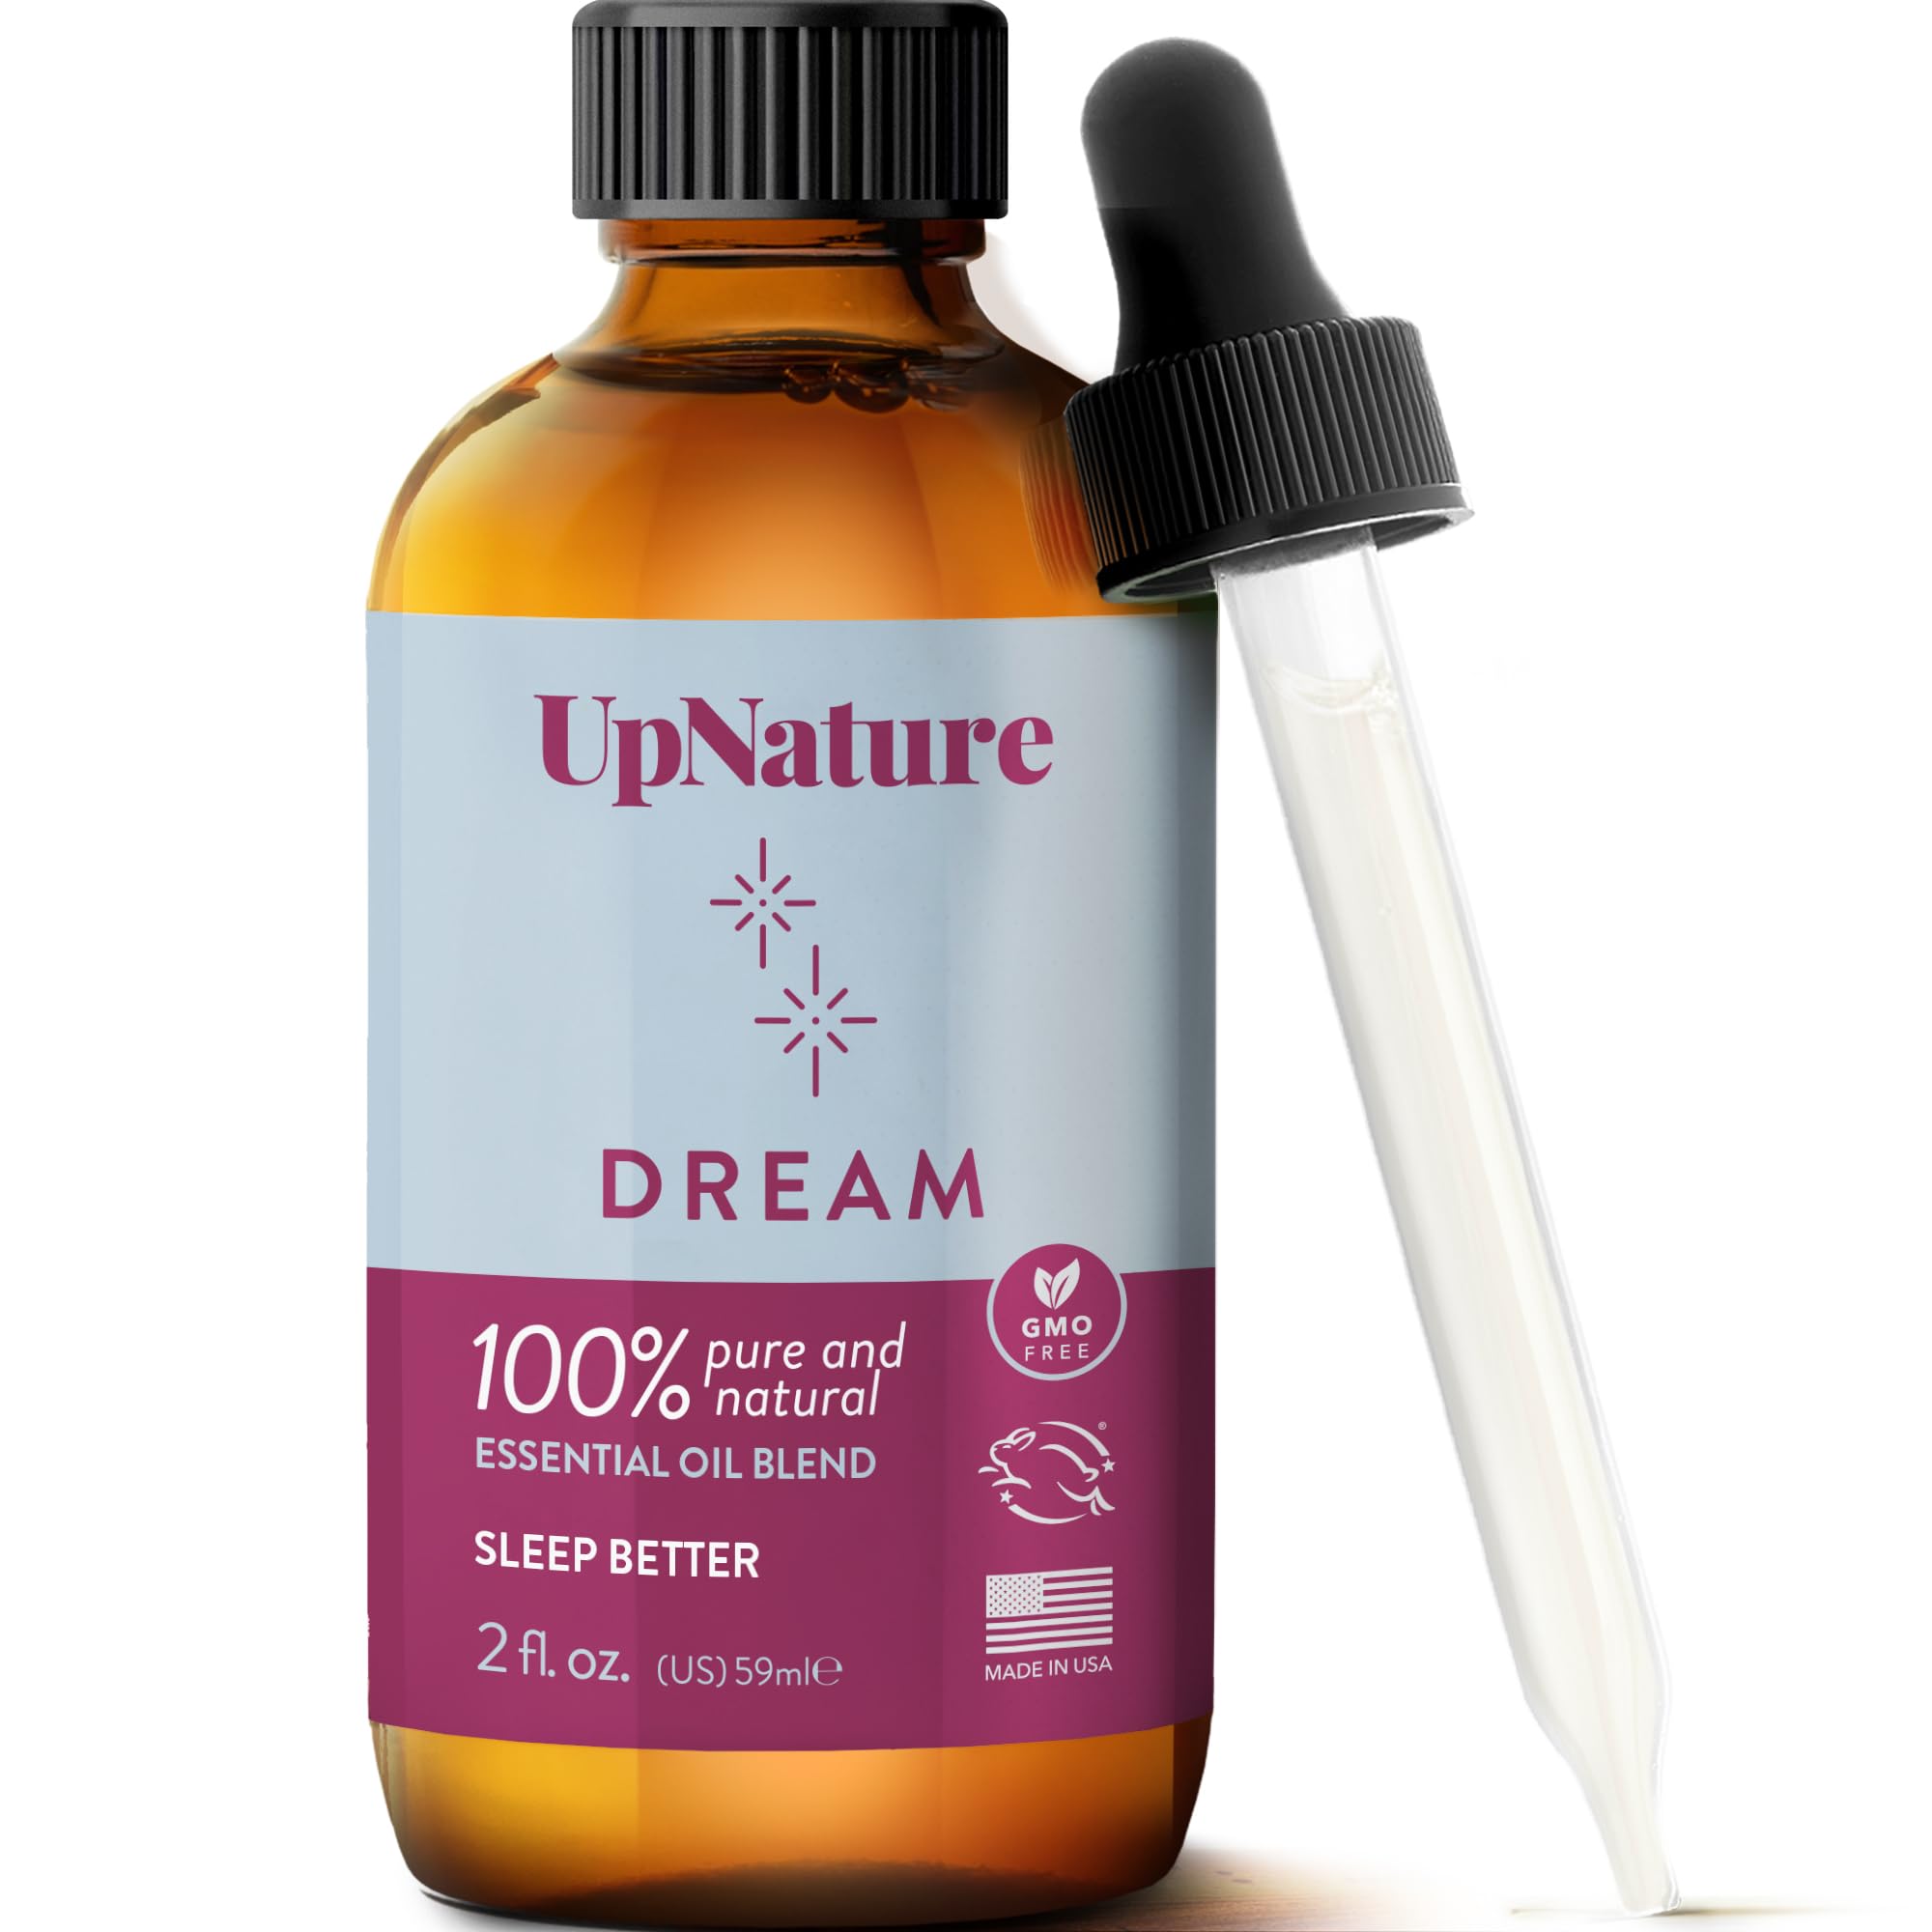 Dream Sleep Essential Oil 2 OZ   Sleep Peacefully, Soothing Scent, Calming, Serenity, Good Night Sleep - Therapeutic Grade, Undiluted, Non-GMO, Aromatherapy with Dropper